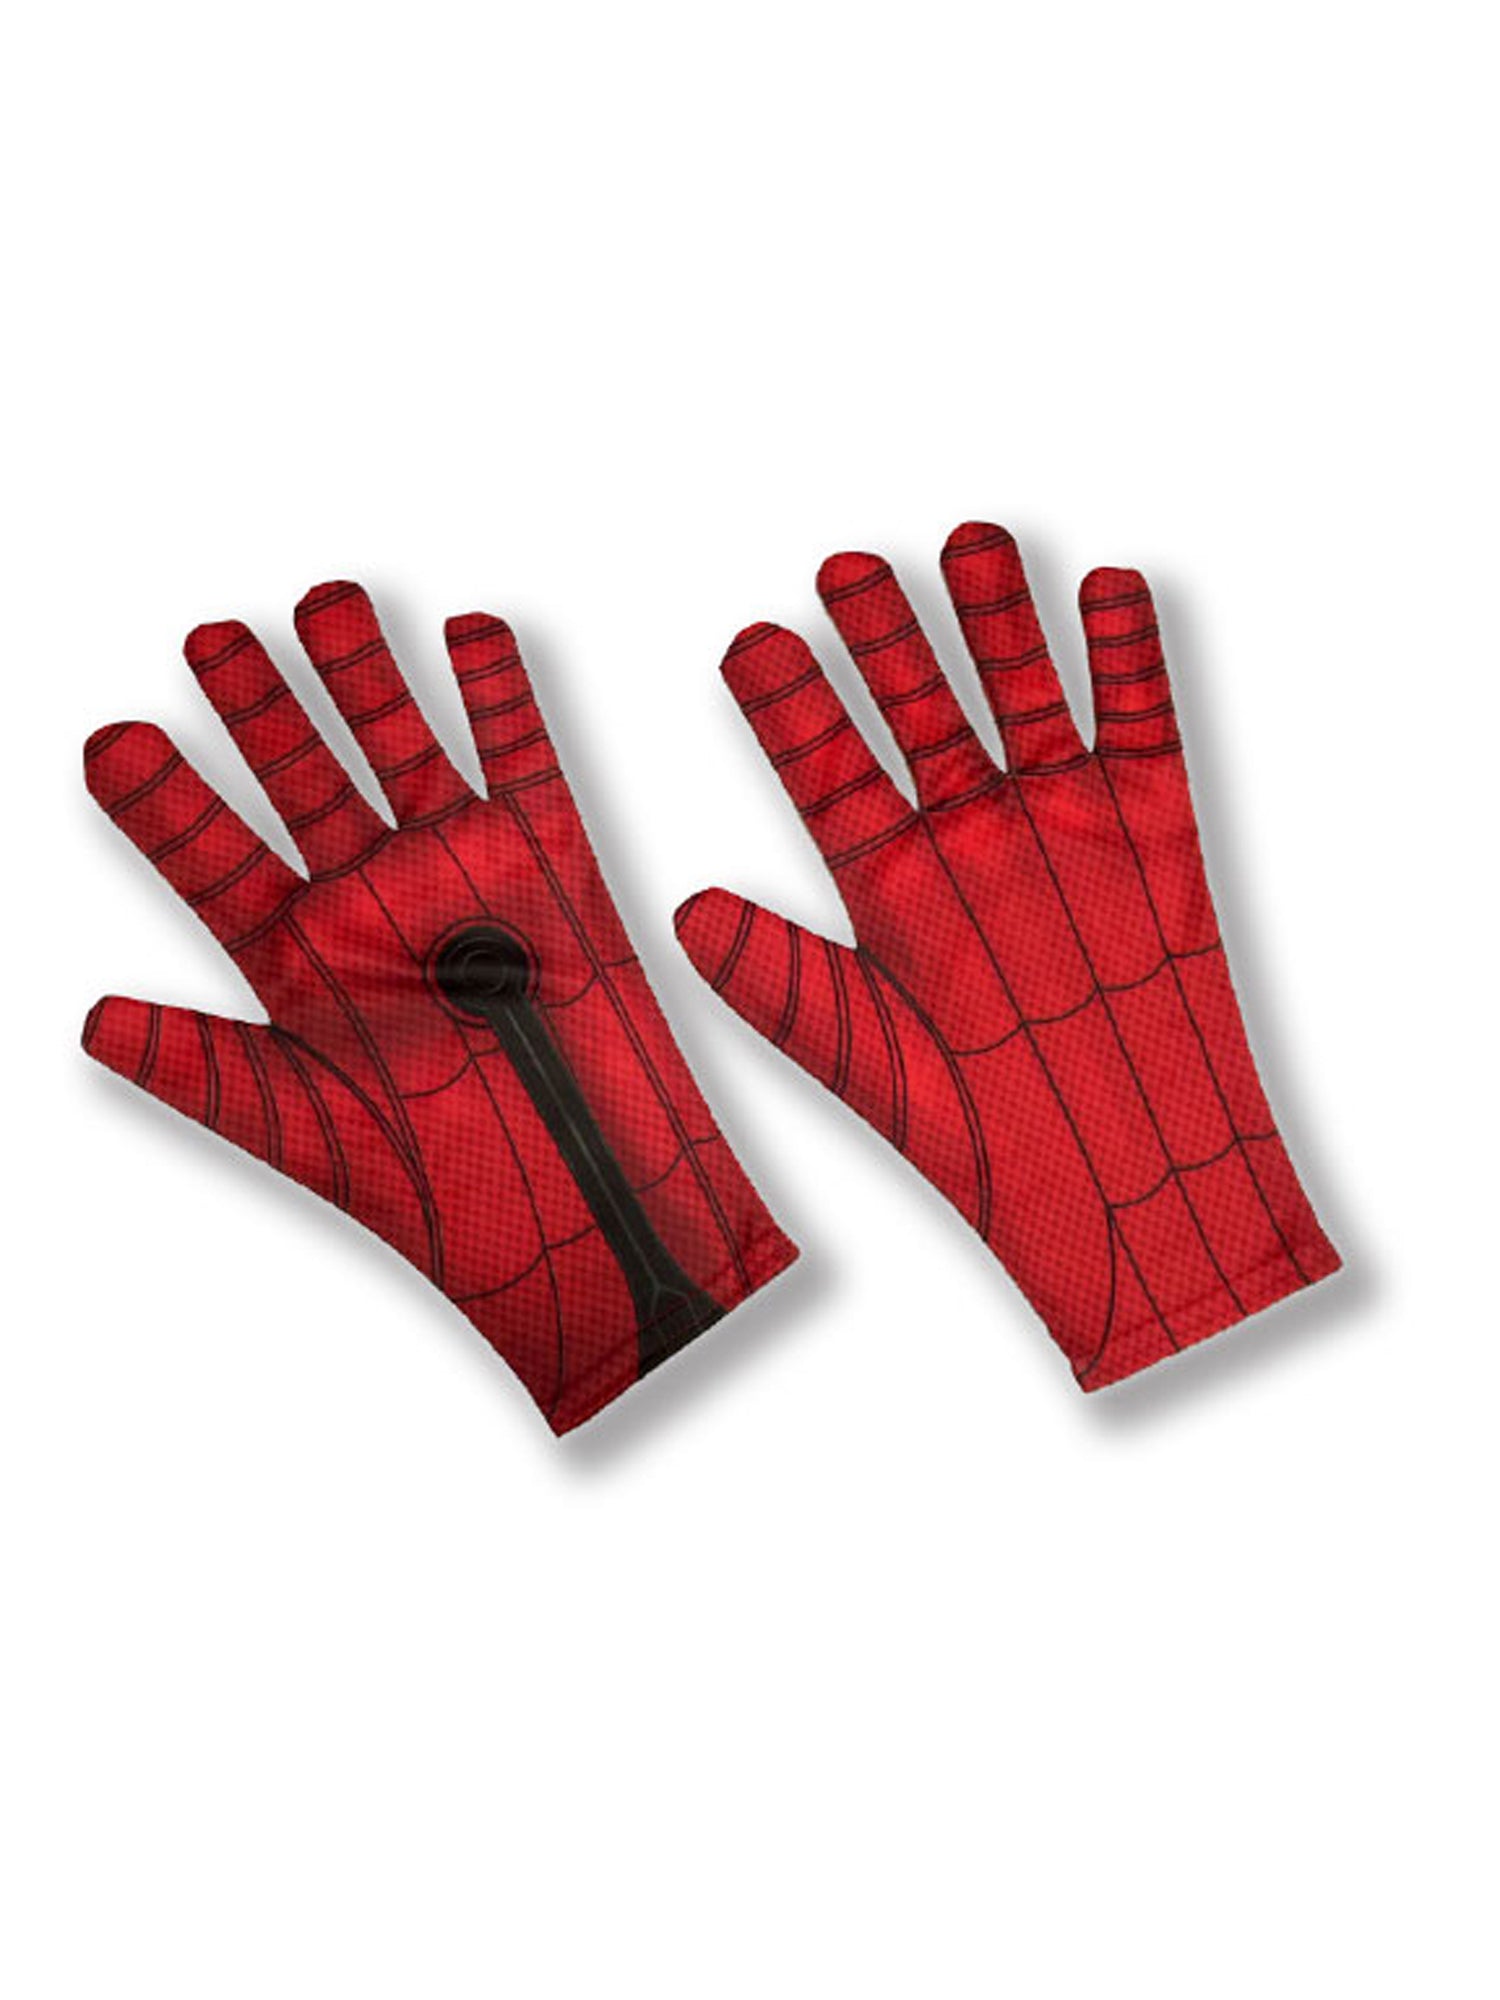 Spider-Man, Avengers, Multi, Marvel, Accessories, Adult, Front